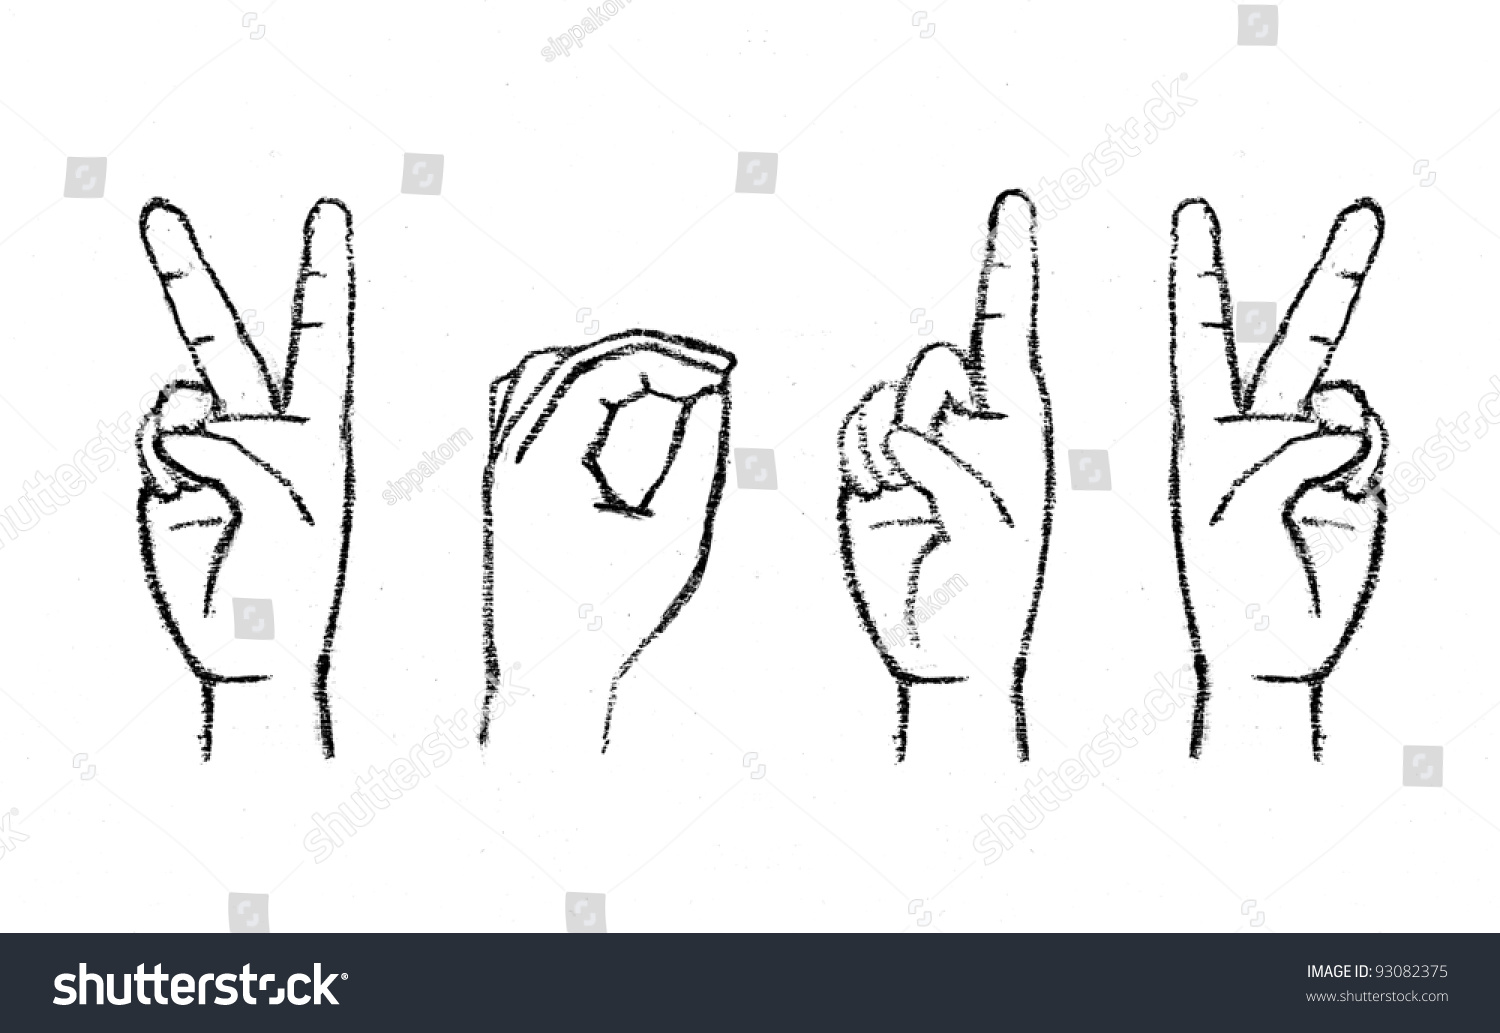 Royalty Free Stock Illustration Of Hand Drawing By Pencil On Board